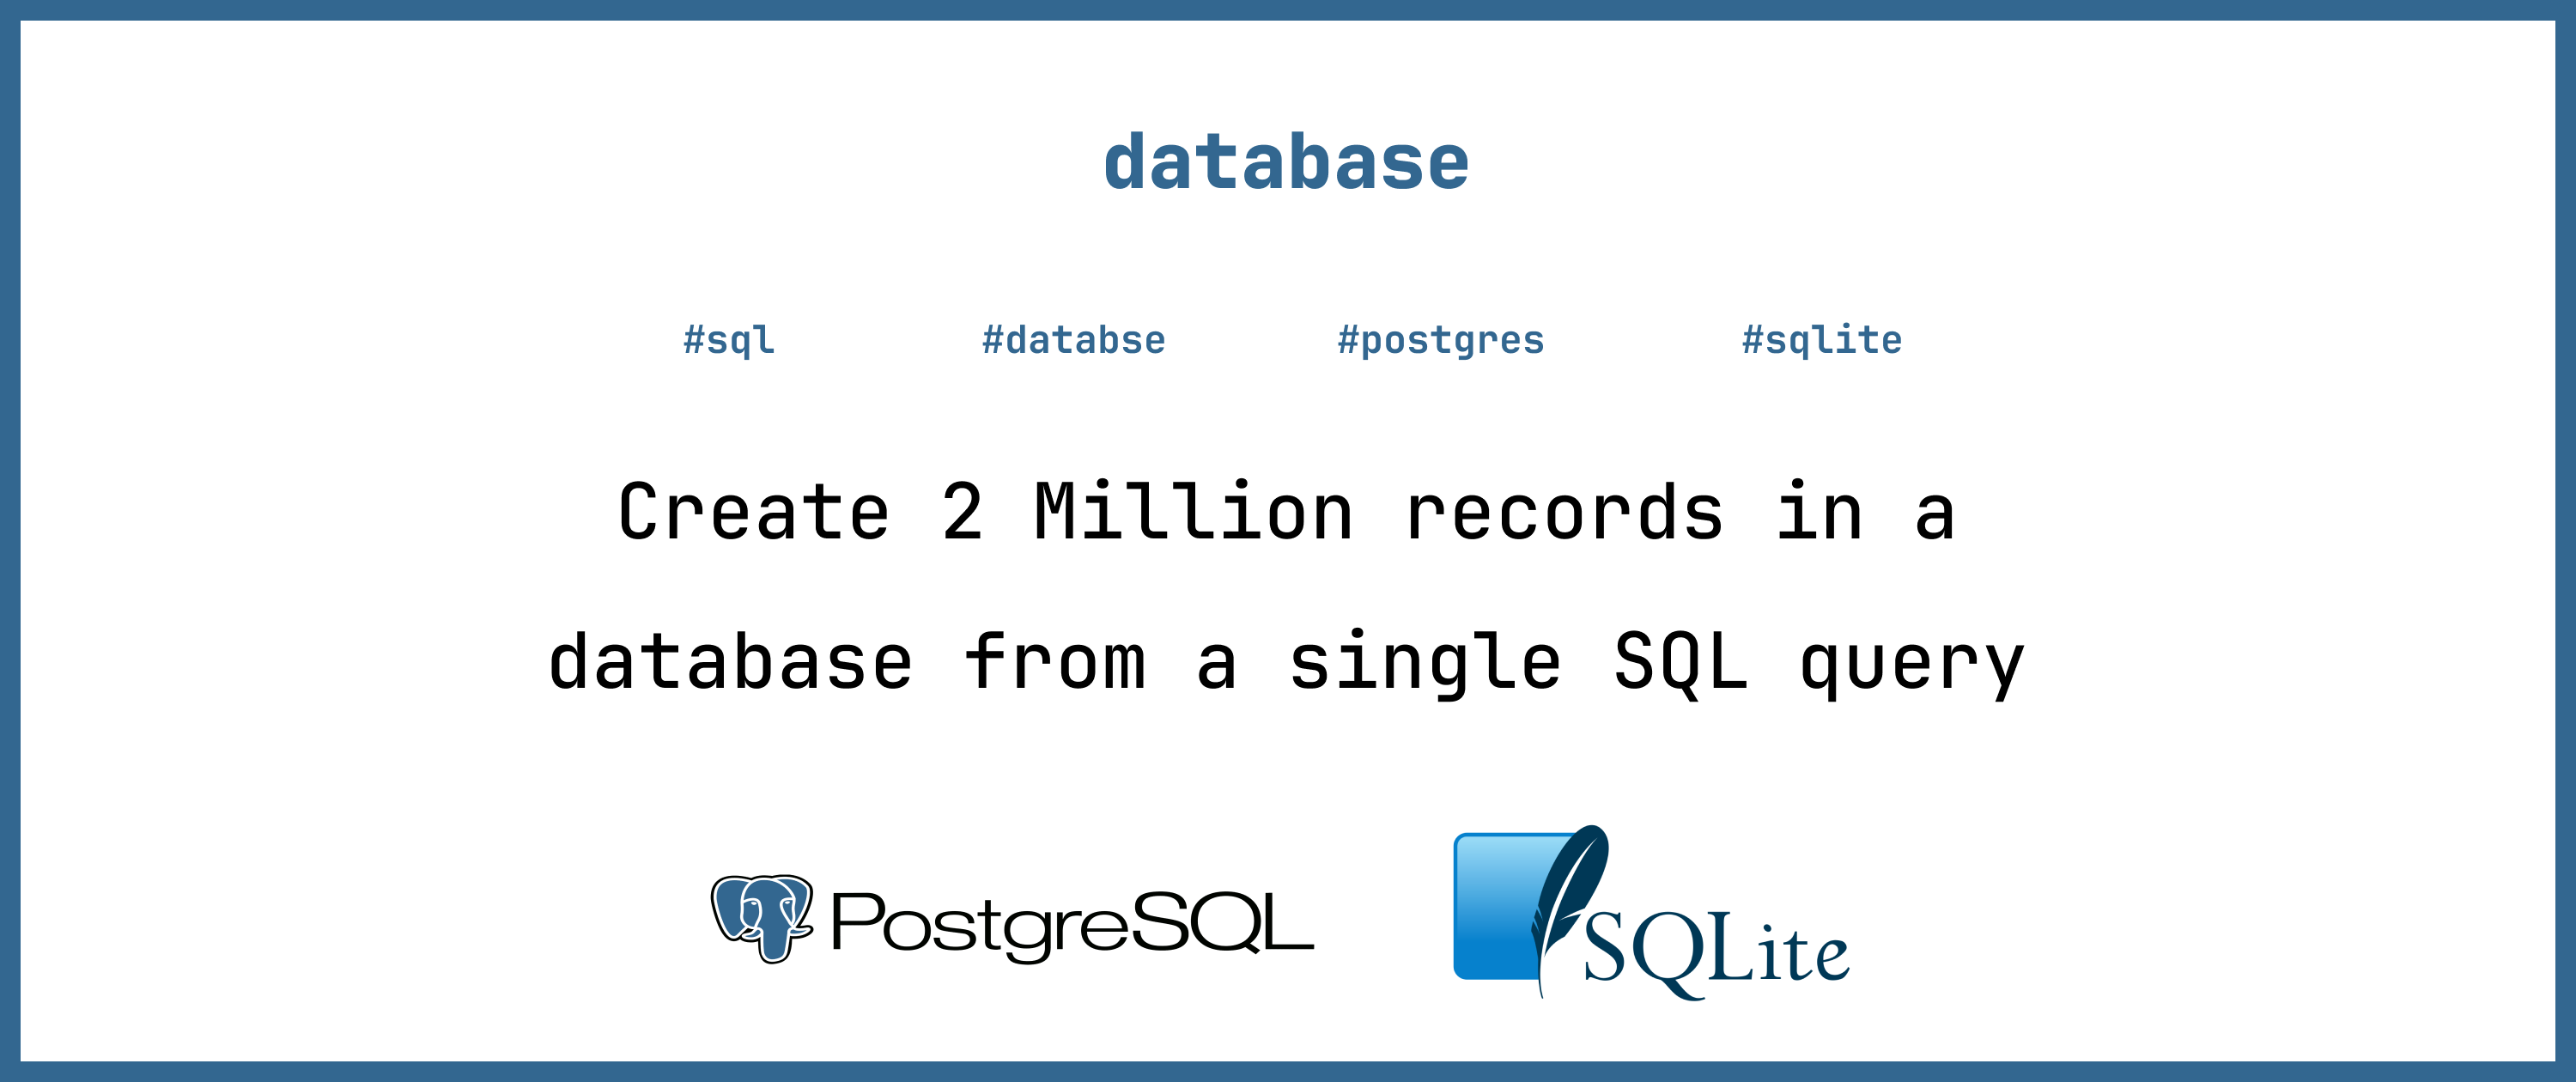 Create 2 Million records in a database from a single SQL query